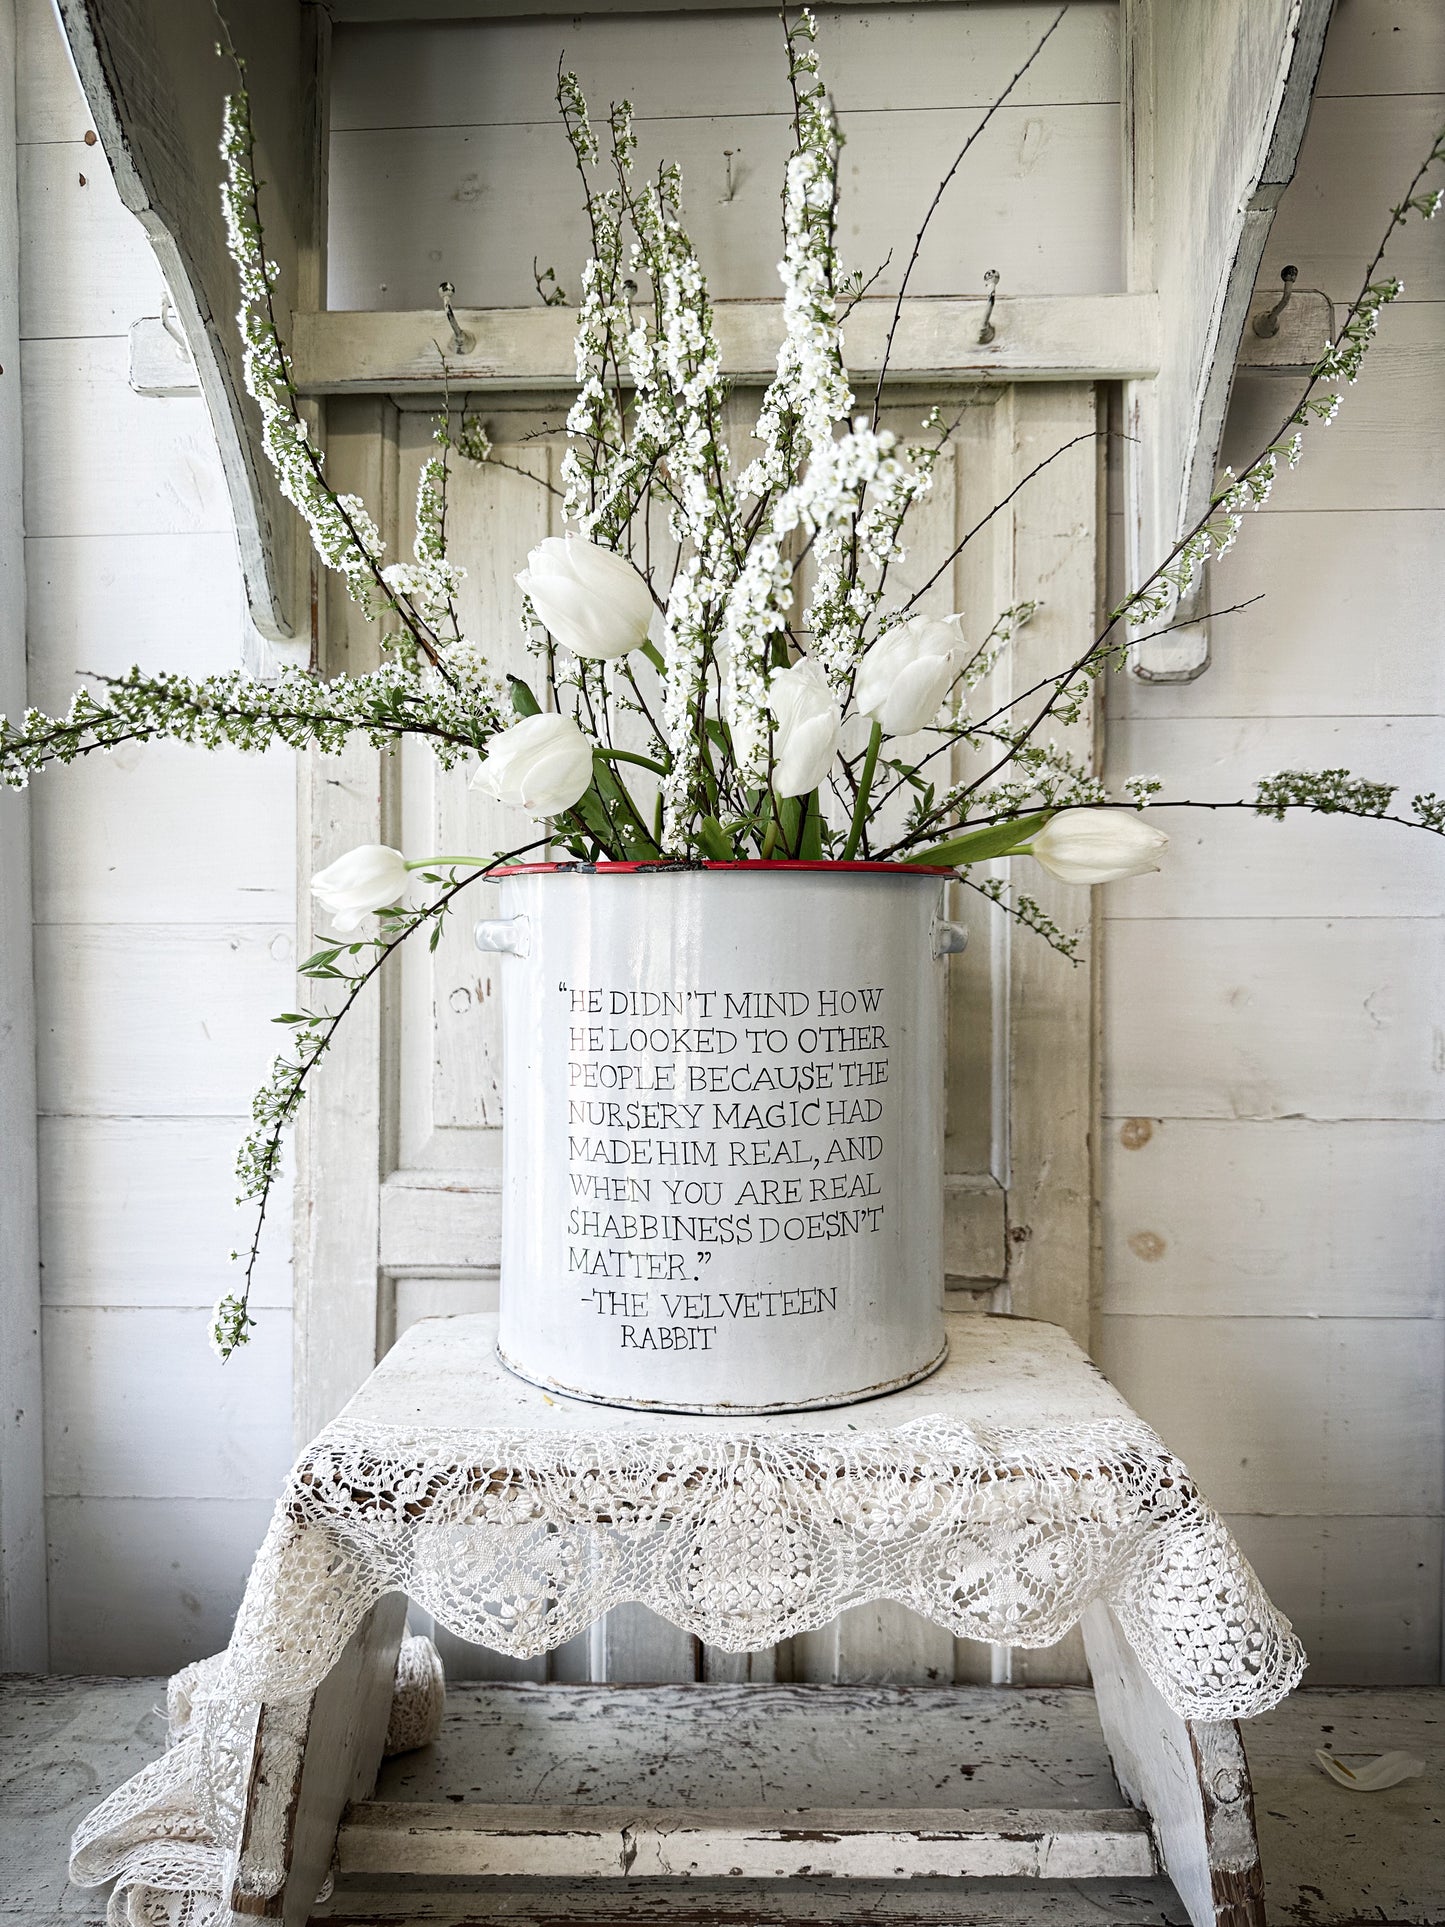 A beautiful vintage enamel canister with Velveteen Rabbit quote